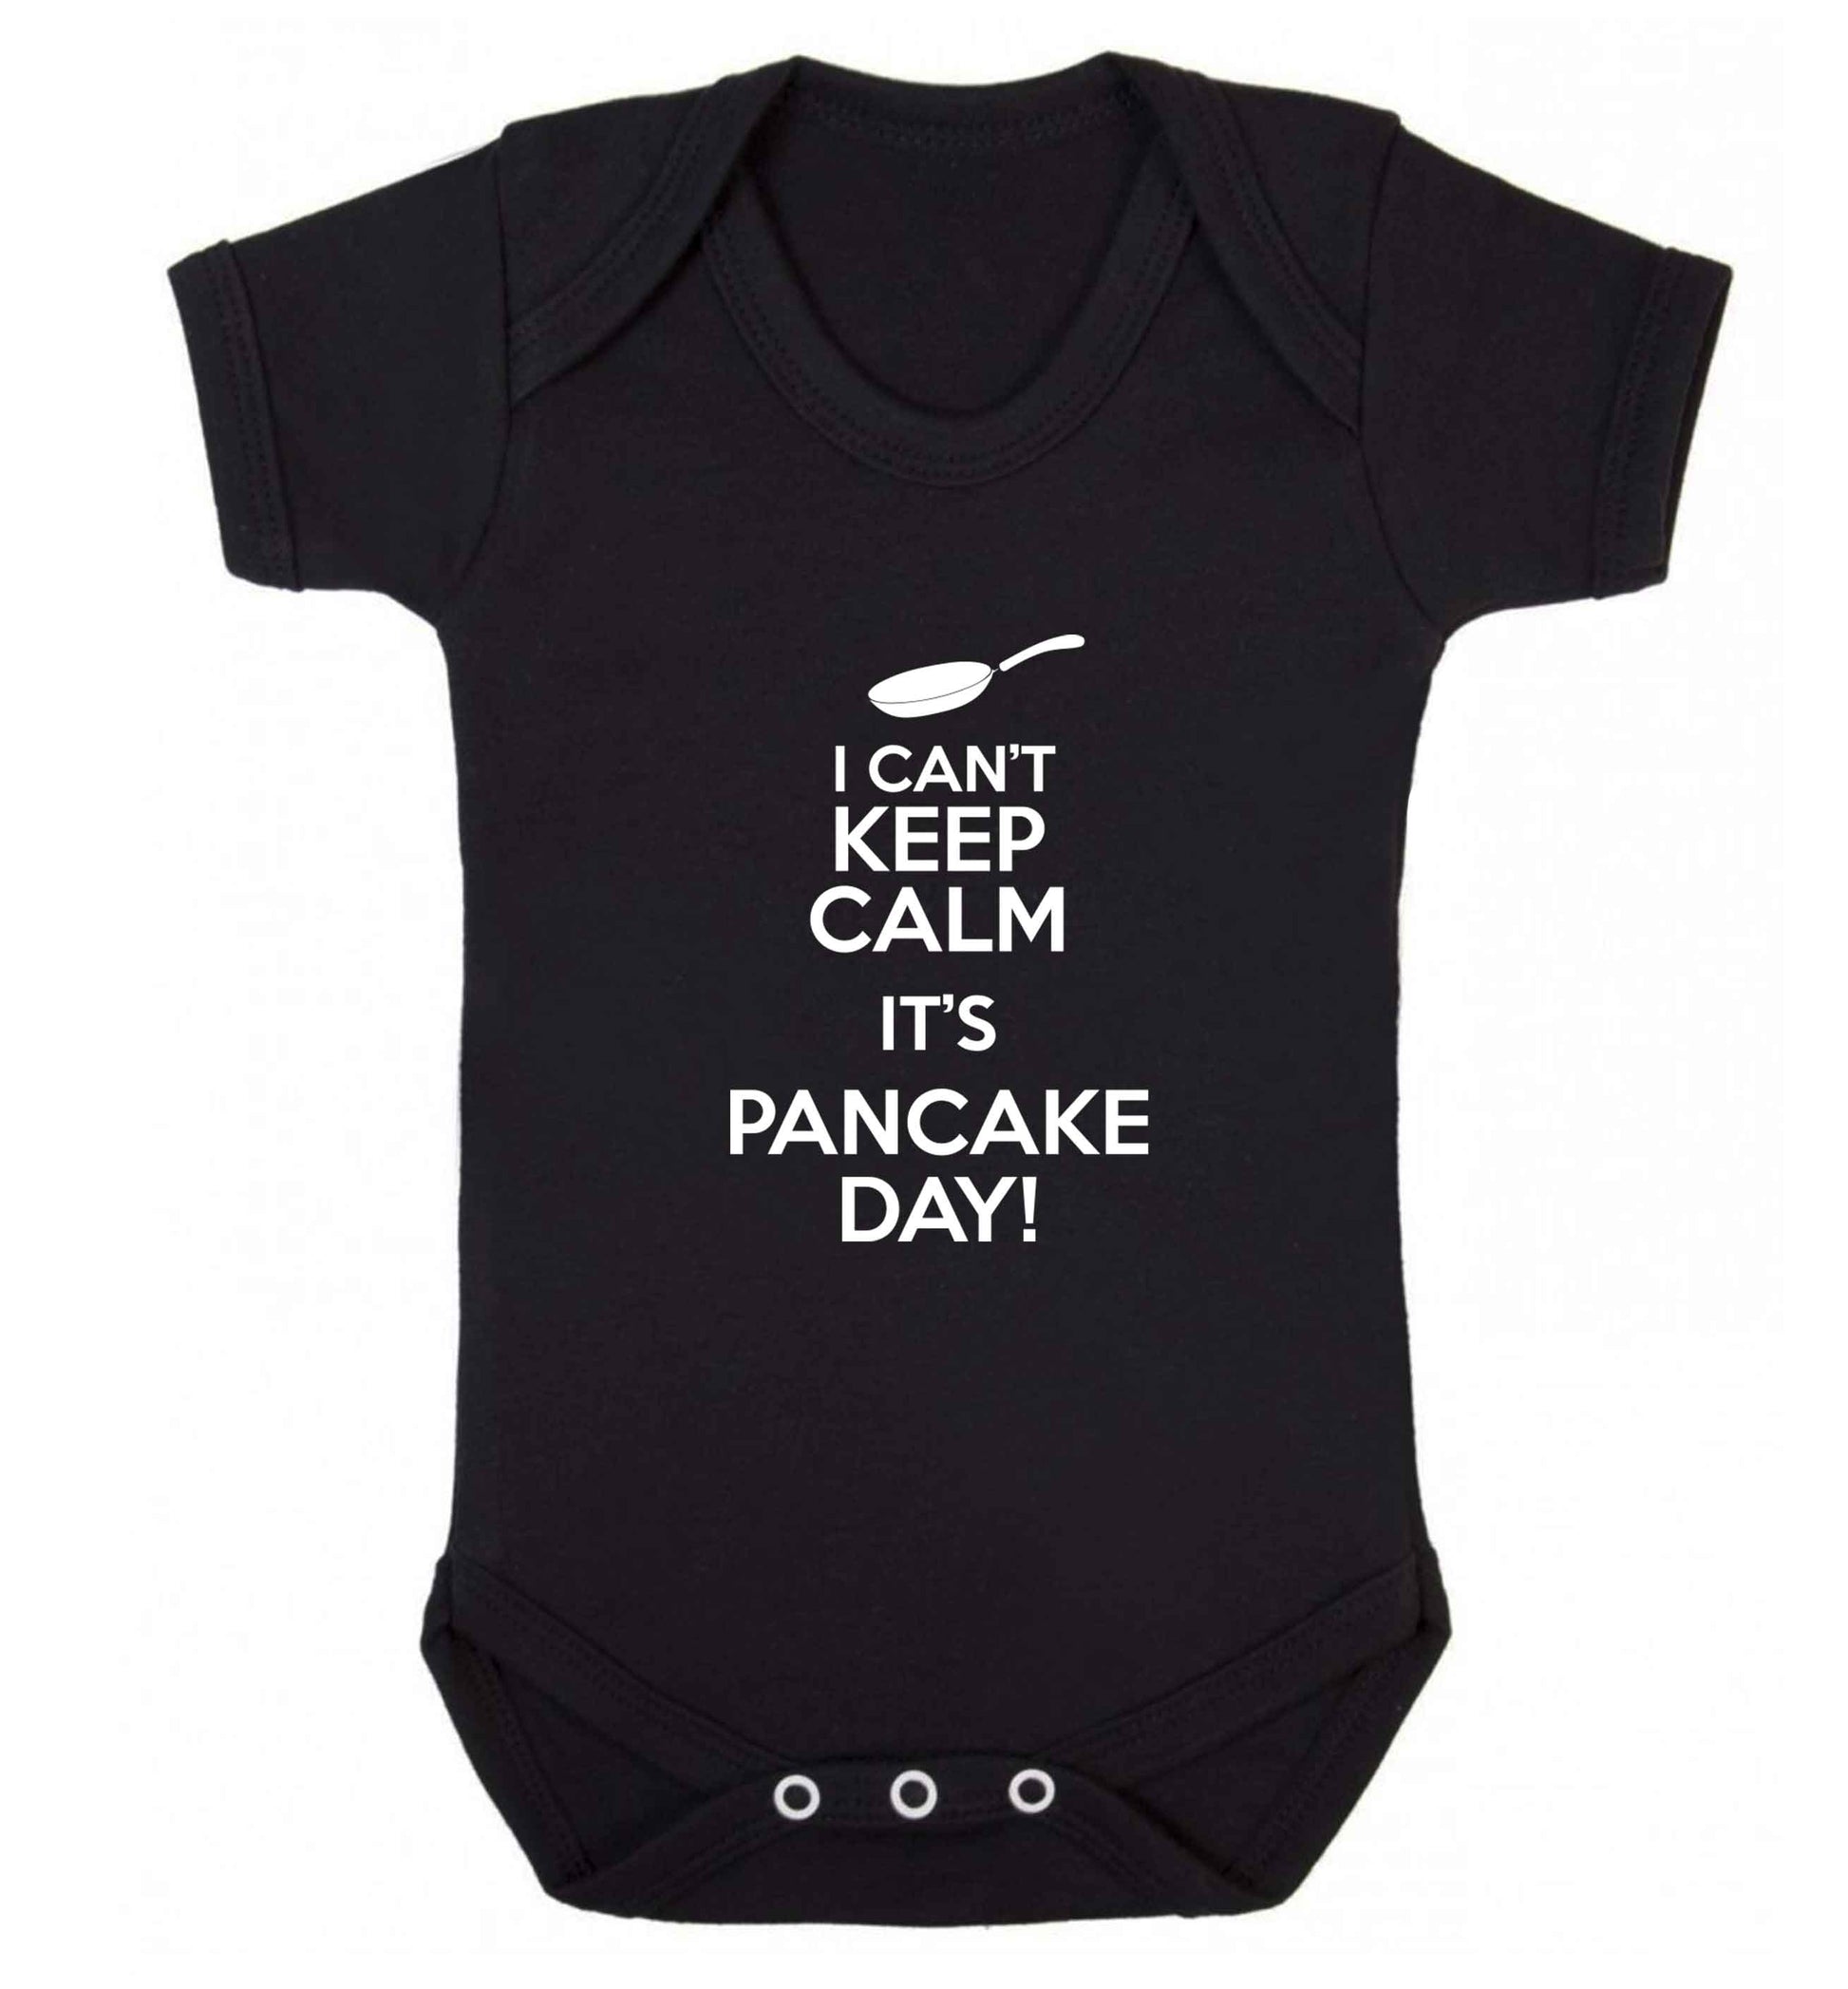 I can't keep calm it's pancake day! baby vest black 18-24 months